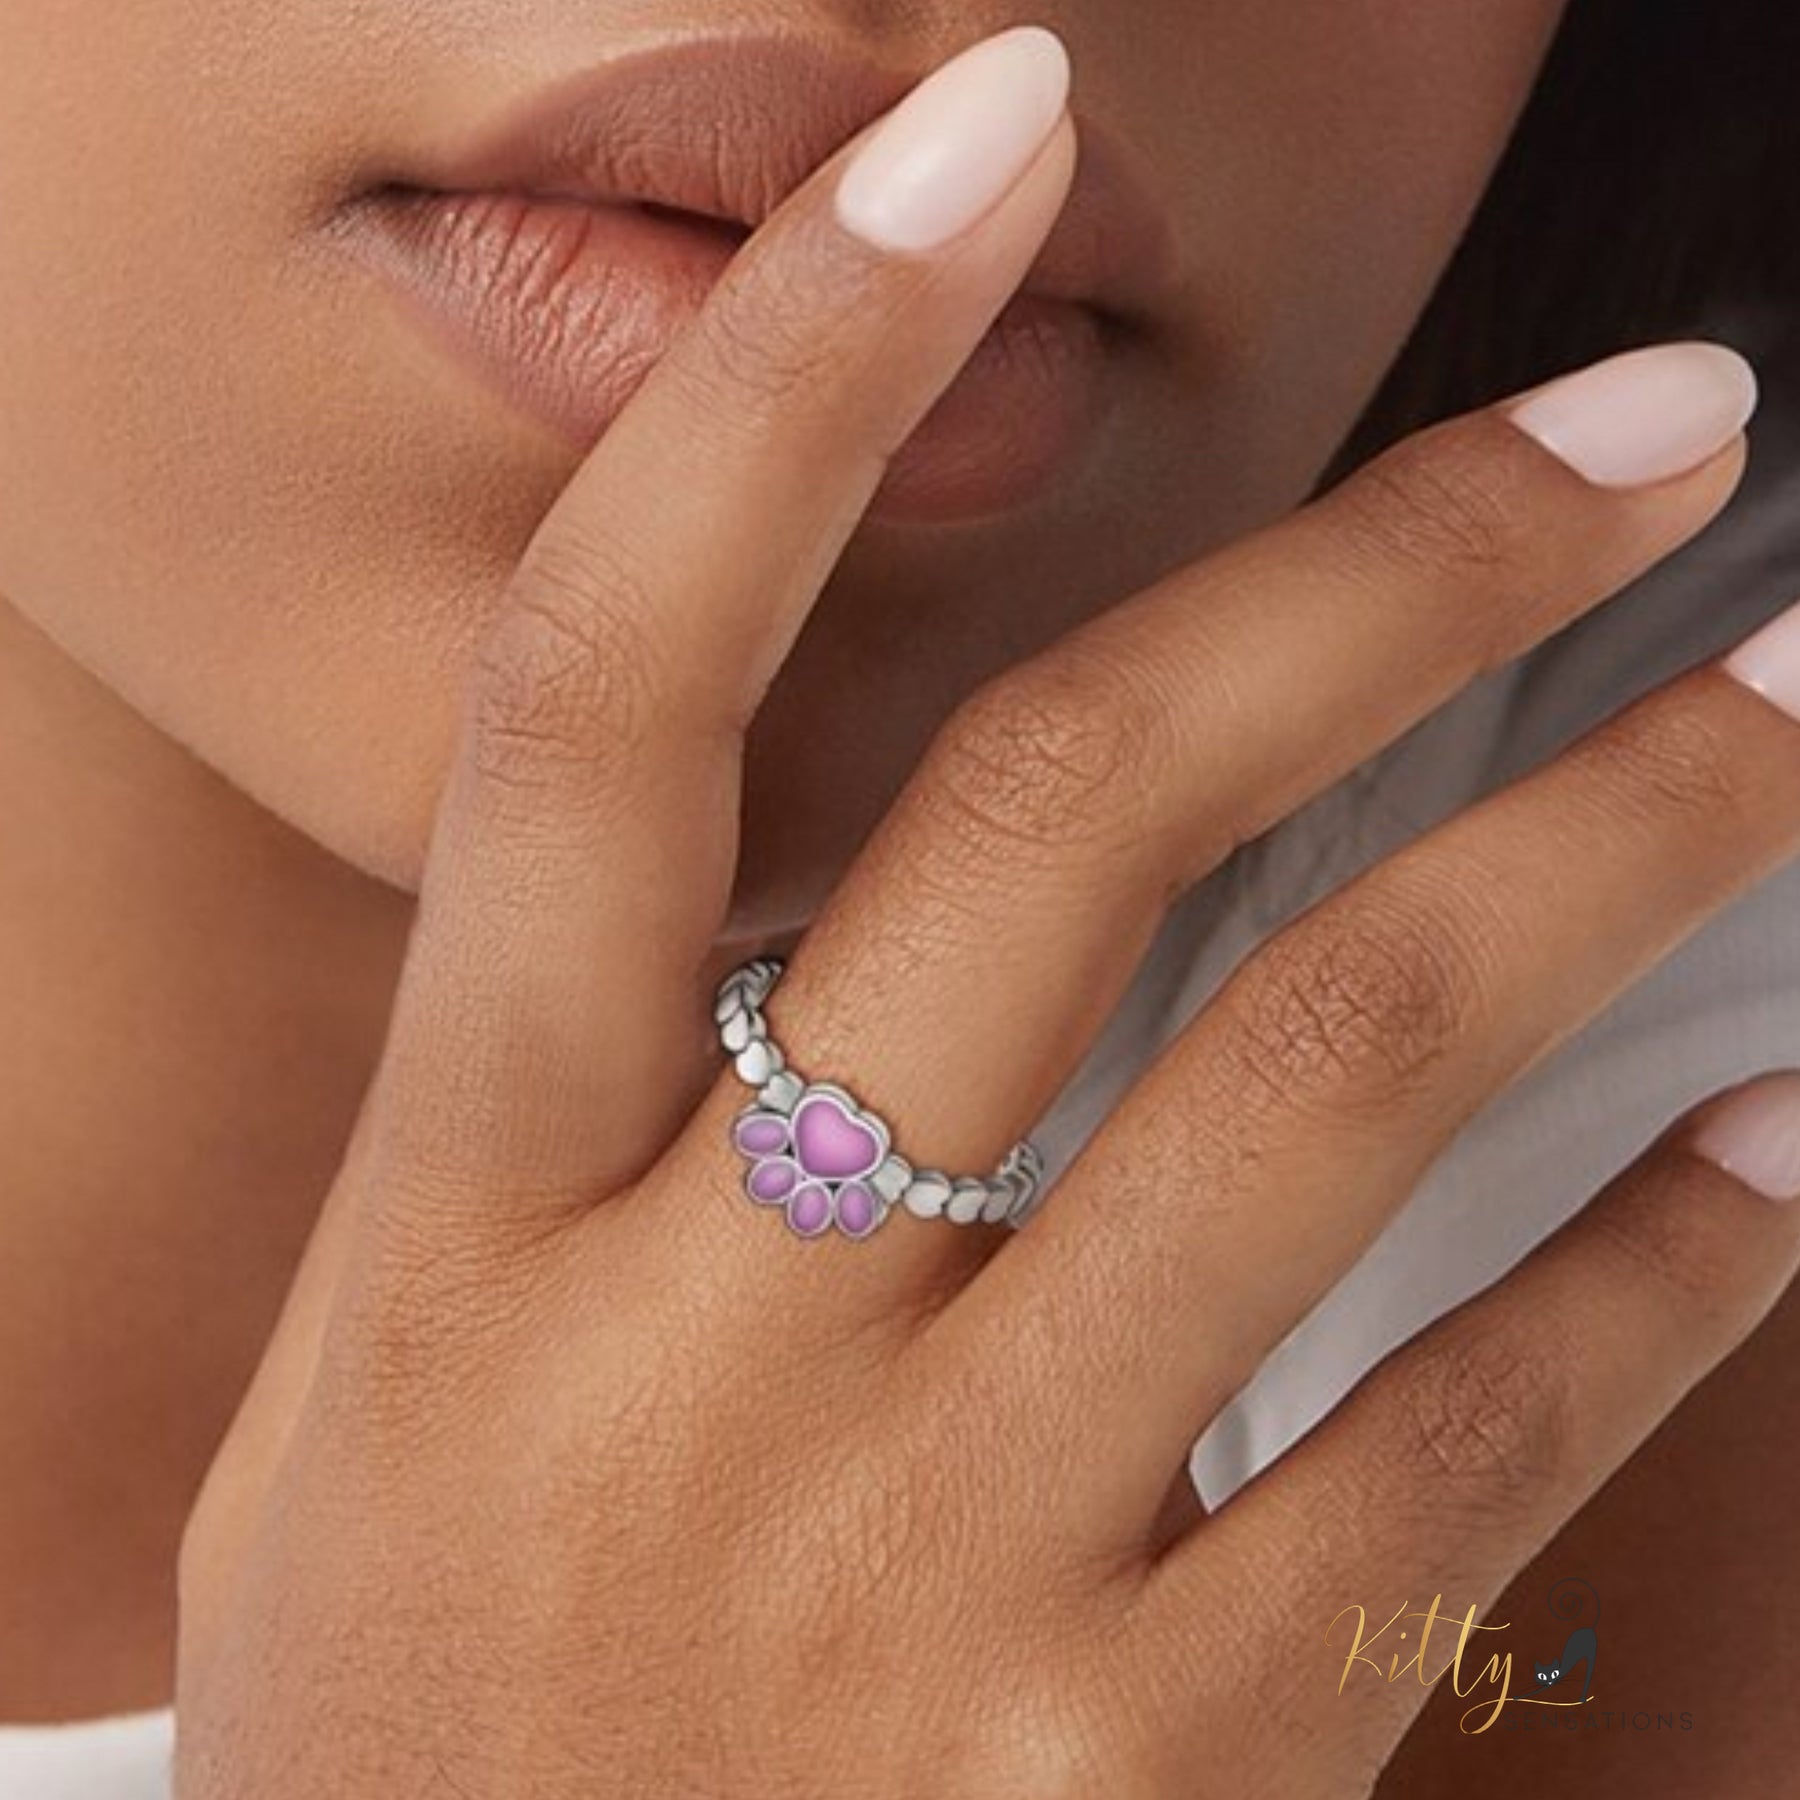 www.KittySensations.com: Heart Band Enameled Kitty Paw Ring in Solid 925 Sterling Silver - Adjustable Size ($24.80): https://www.kittysensations.com/products/heart-band-enameled-kitty-paw-ring-in-solid-925-sterling-silver-adjustable-size